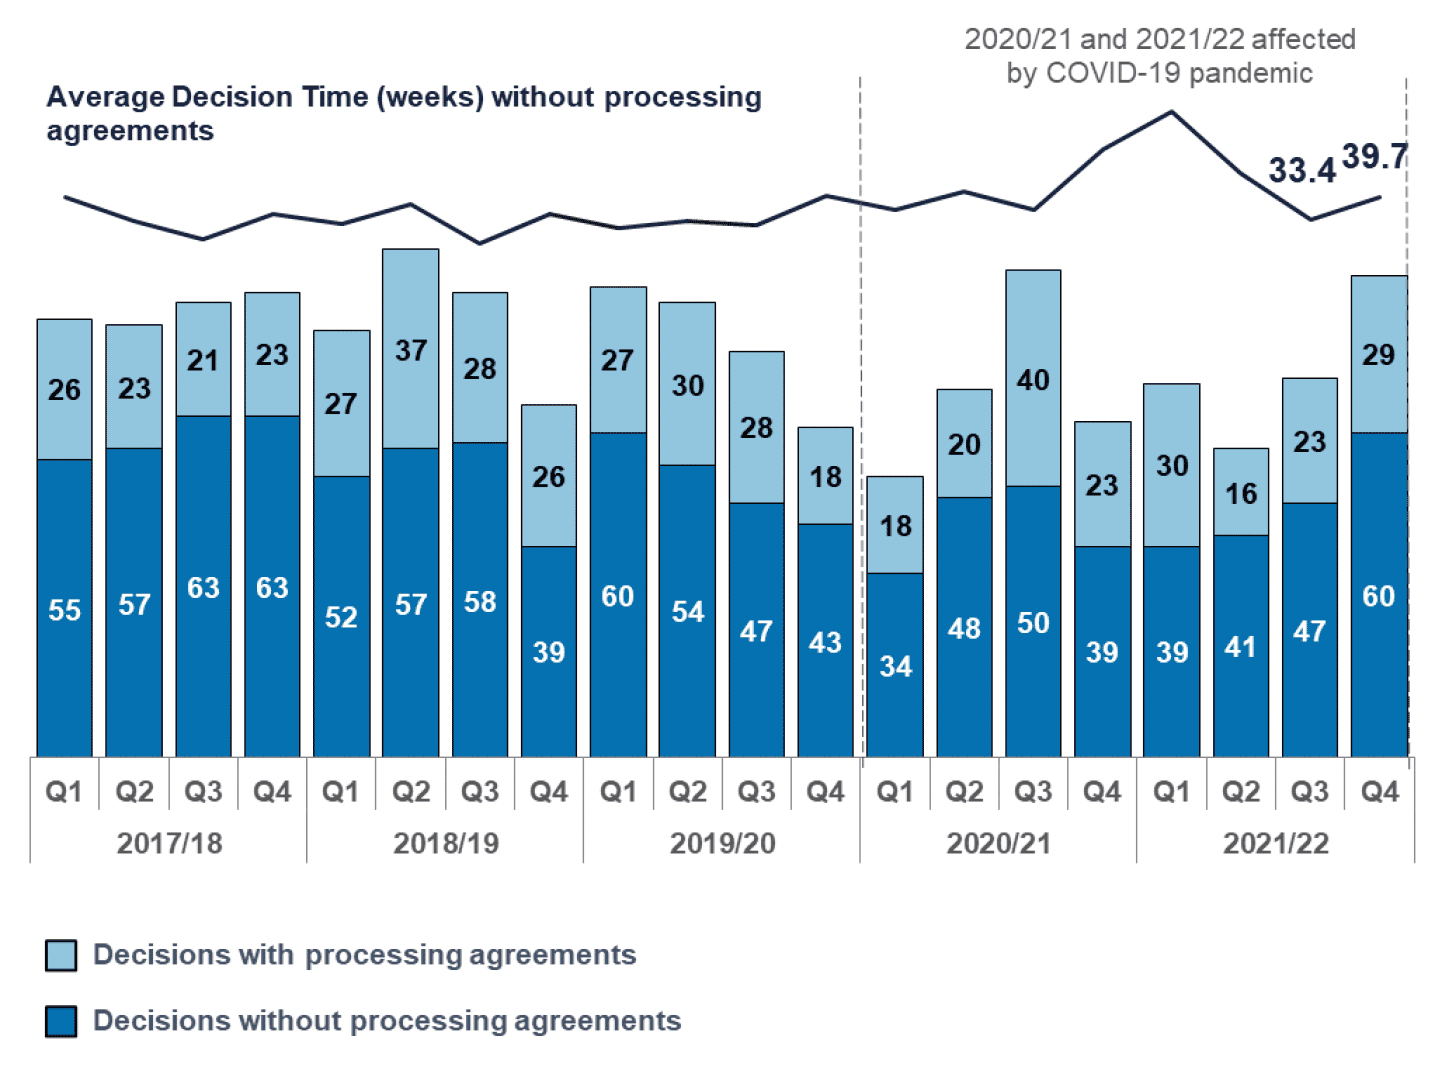 A stacked column chart showing number of major applications decided in each quarter since 2017/18. Also a line chart of average decision times for major applications without processing agreements. The number decided in Q4 of 2021/22 was the highest in over a year. Average decision times fell from the peak in Q1 2021/22  to be more in line with pre-pandemic times in Q3 and Q4.